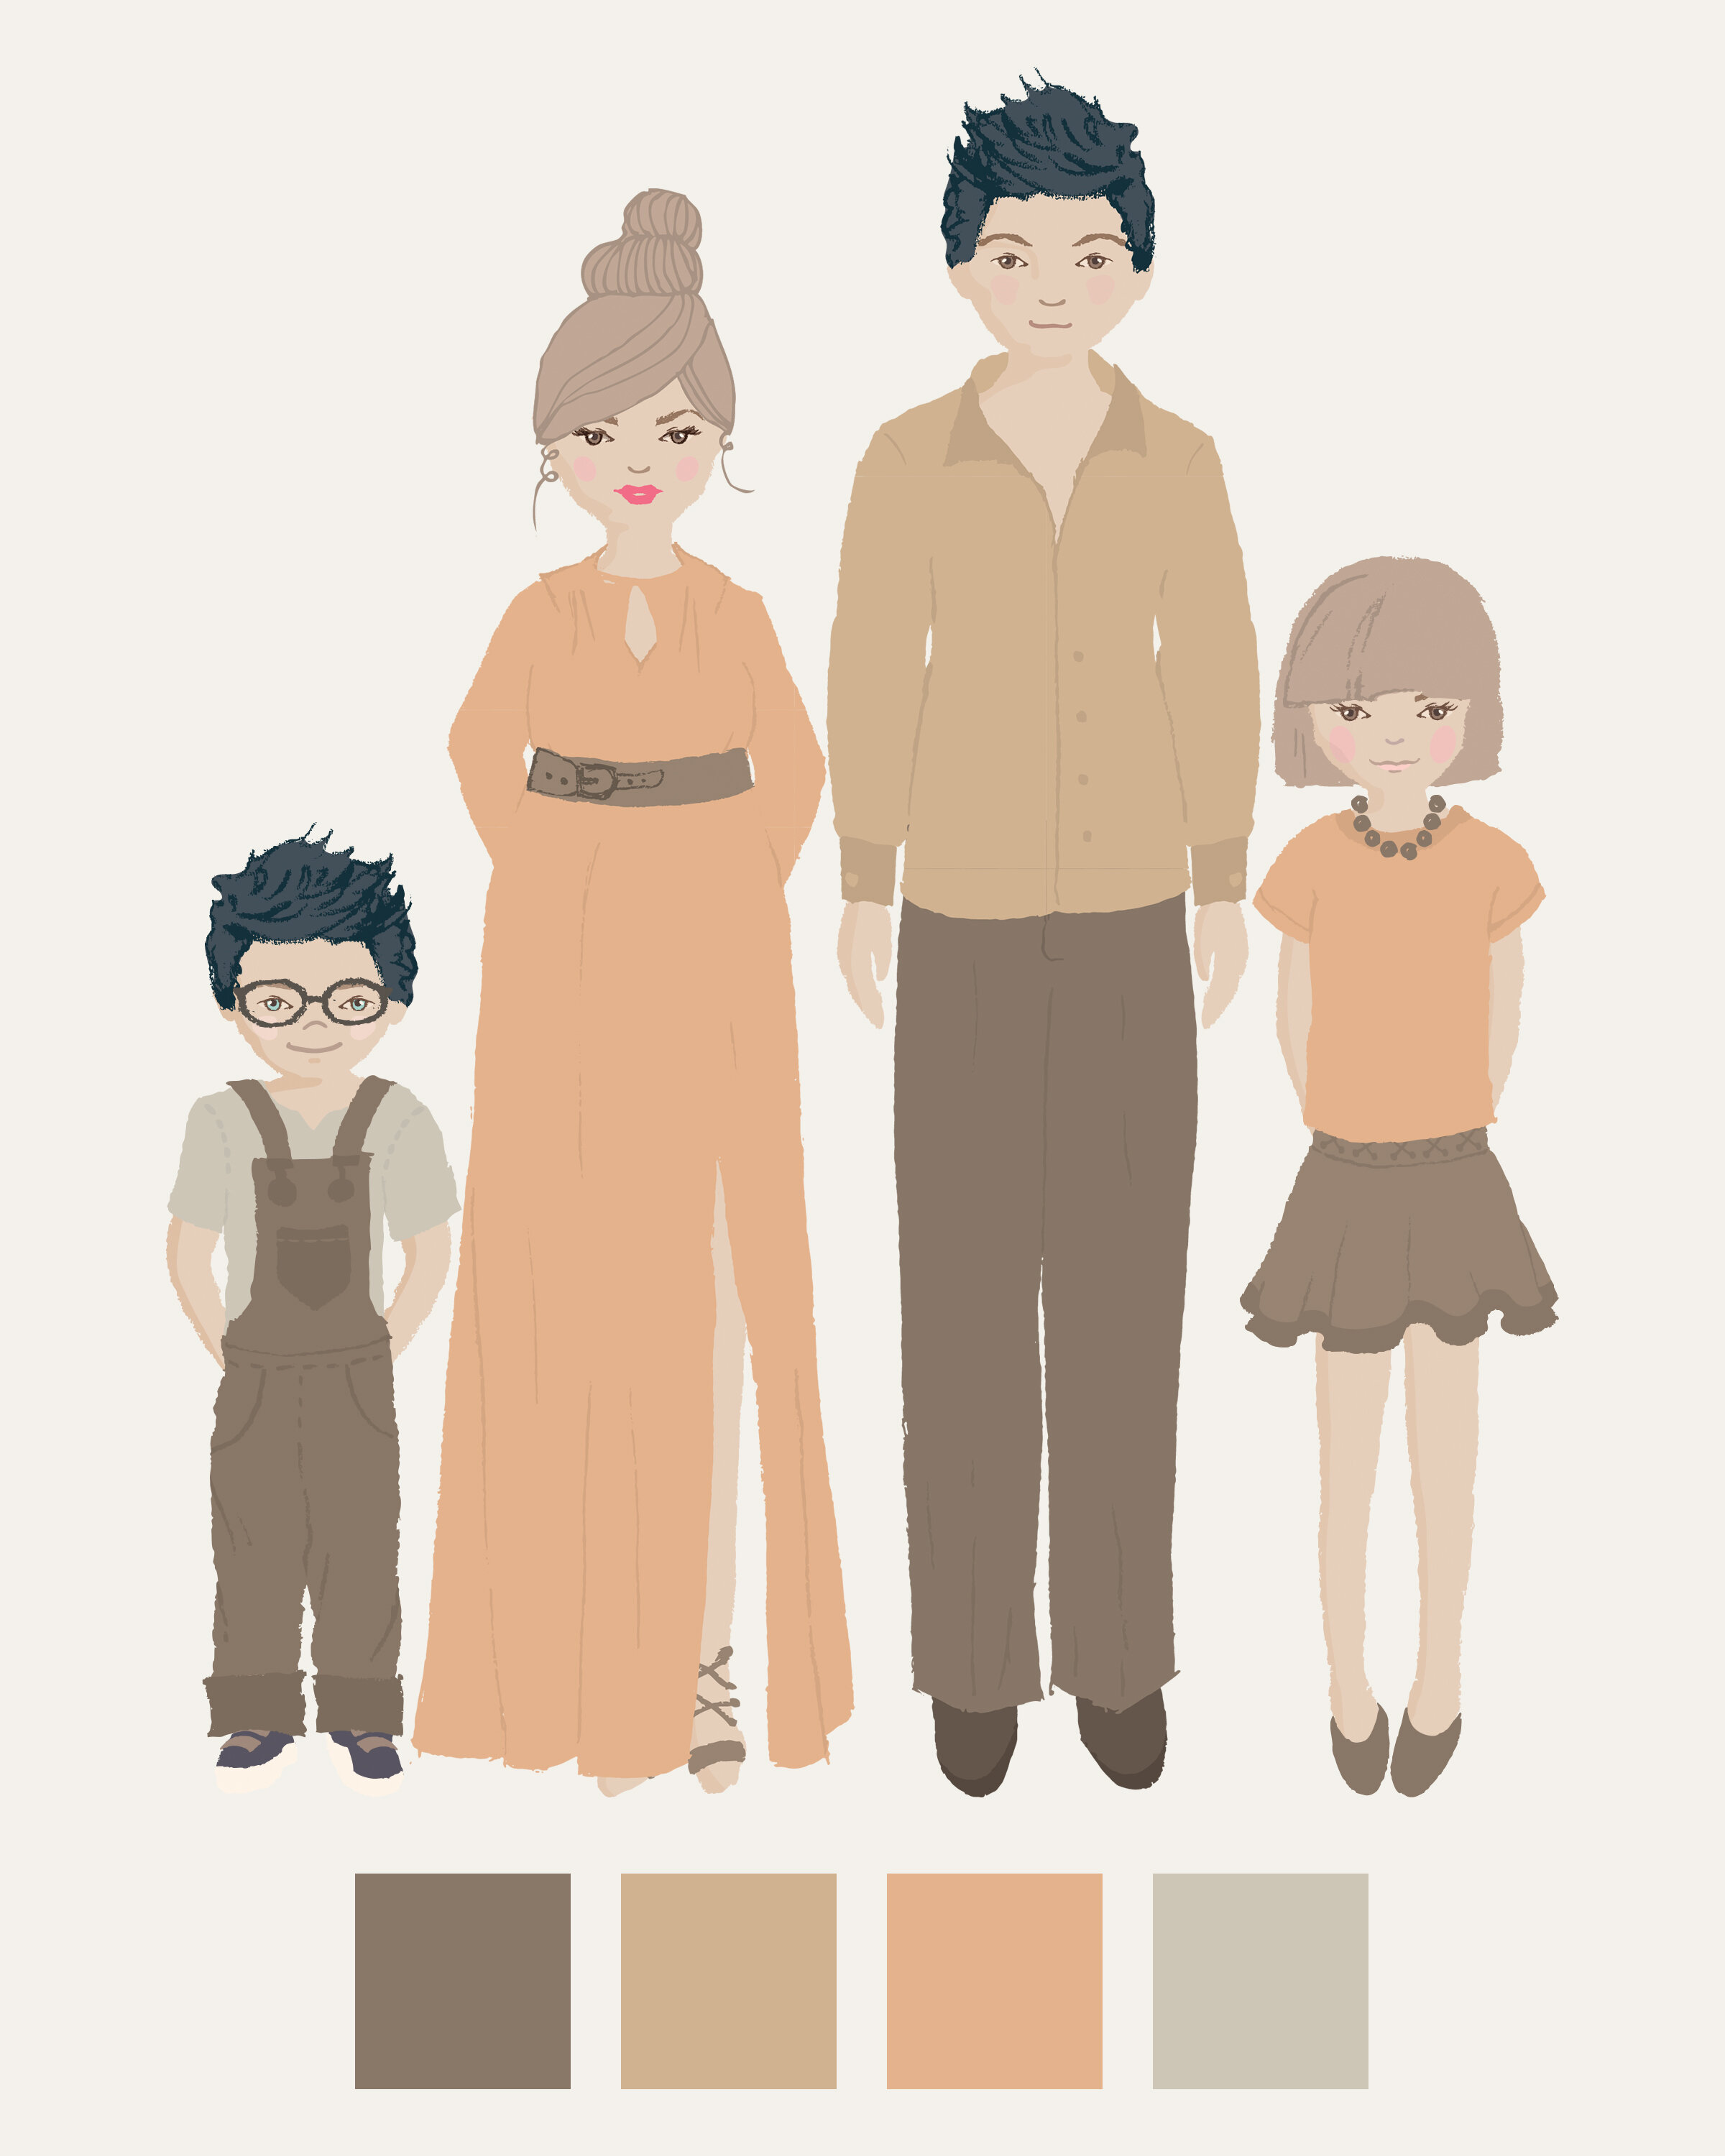 Family outfits color palette with peach, brown, tan, and caramel colors. Think muted tones when choosing outfits for your family photos. Bold and bright colors can often distract from your family pictures.